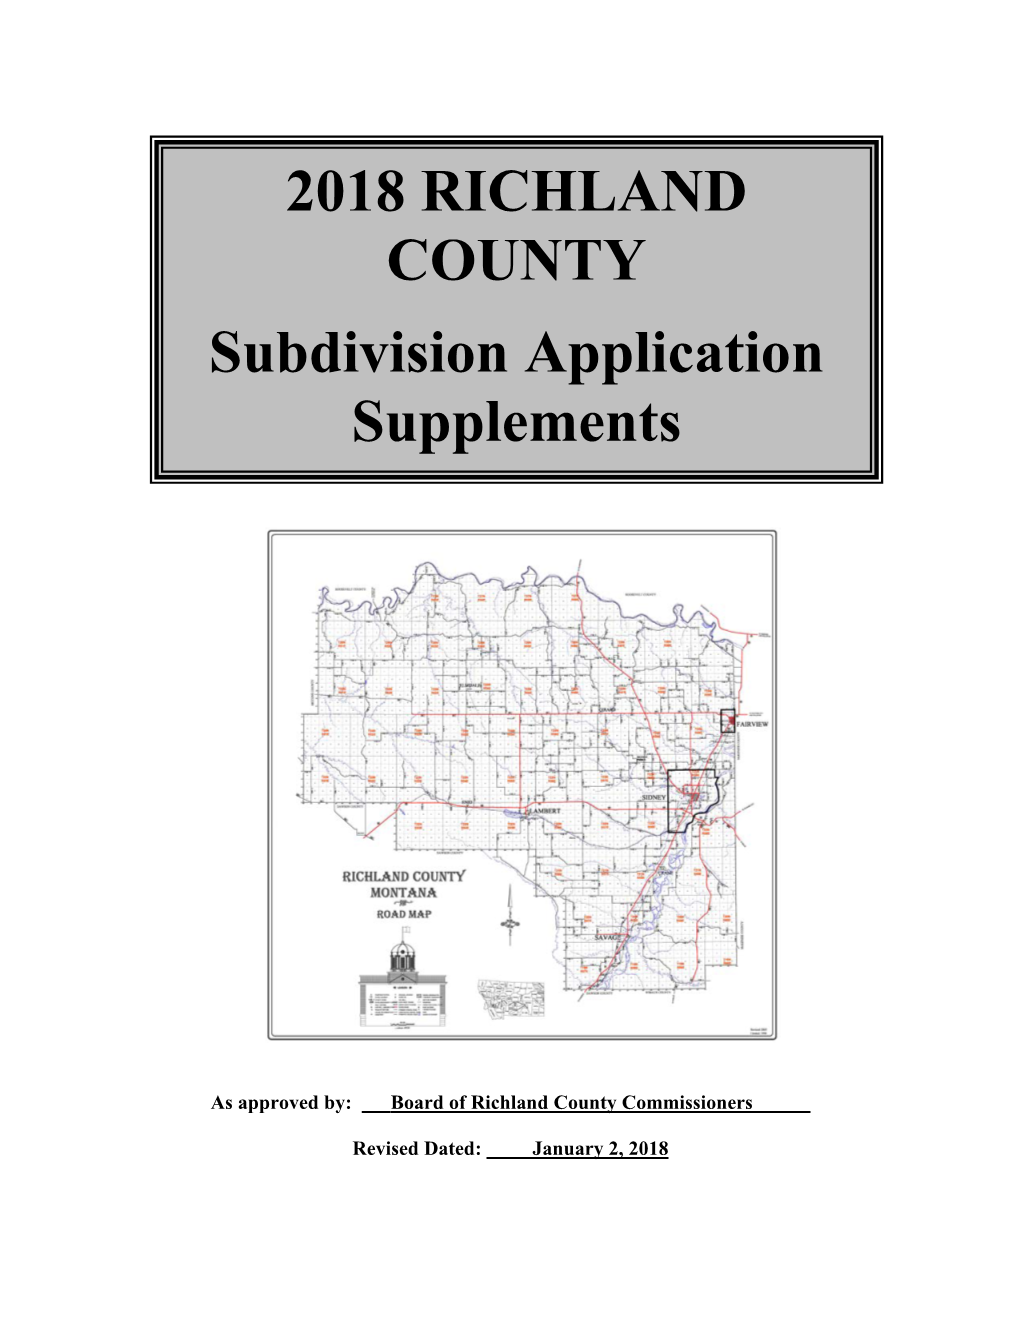 2018 RICHLAND COUNTY Subdivision Application Supplements